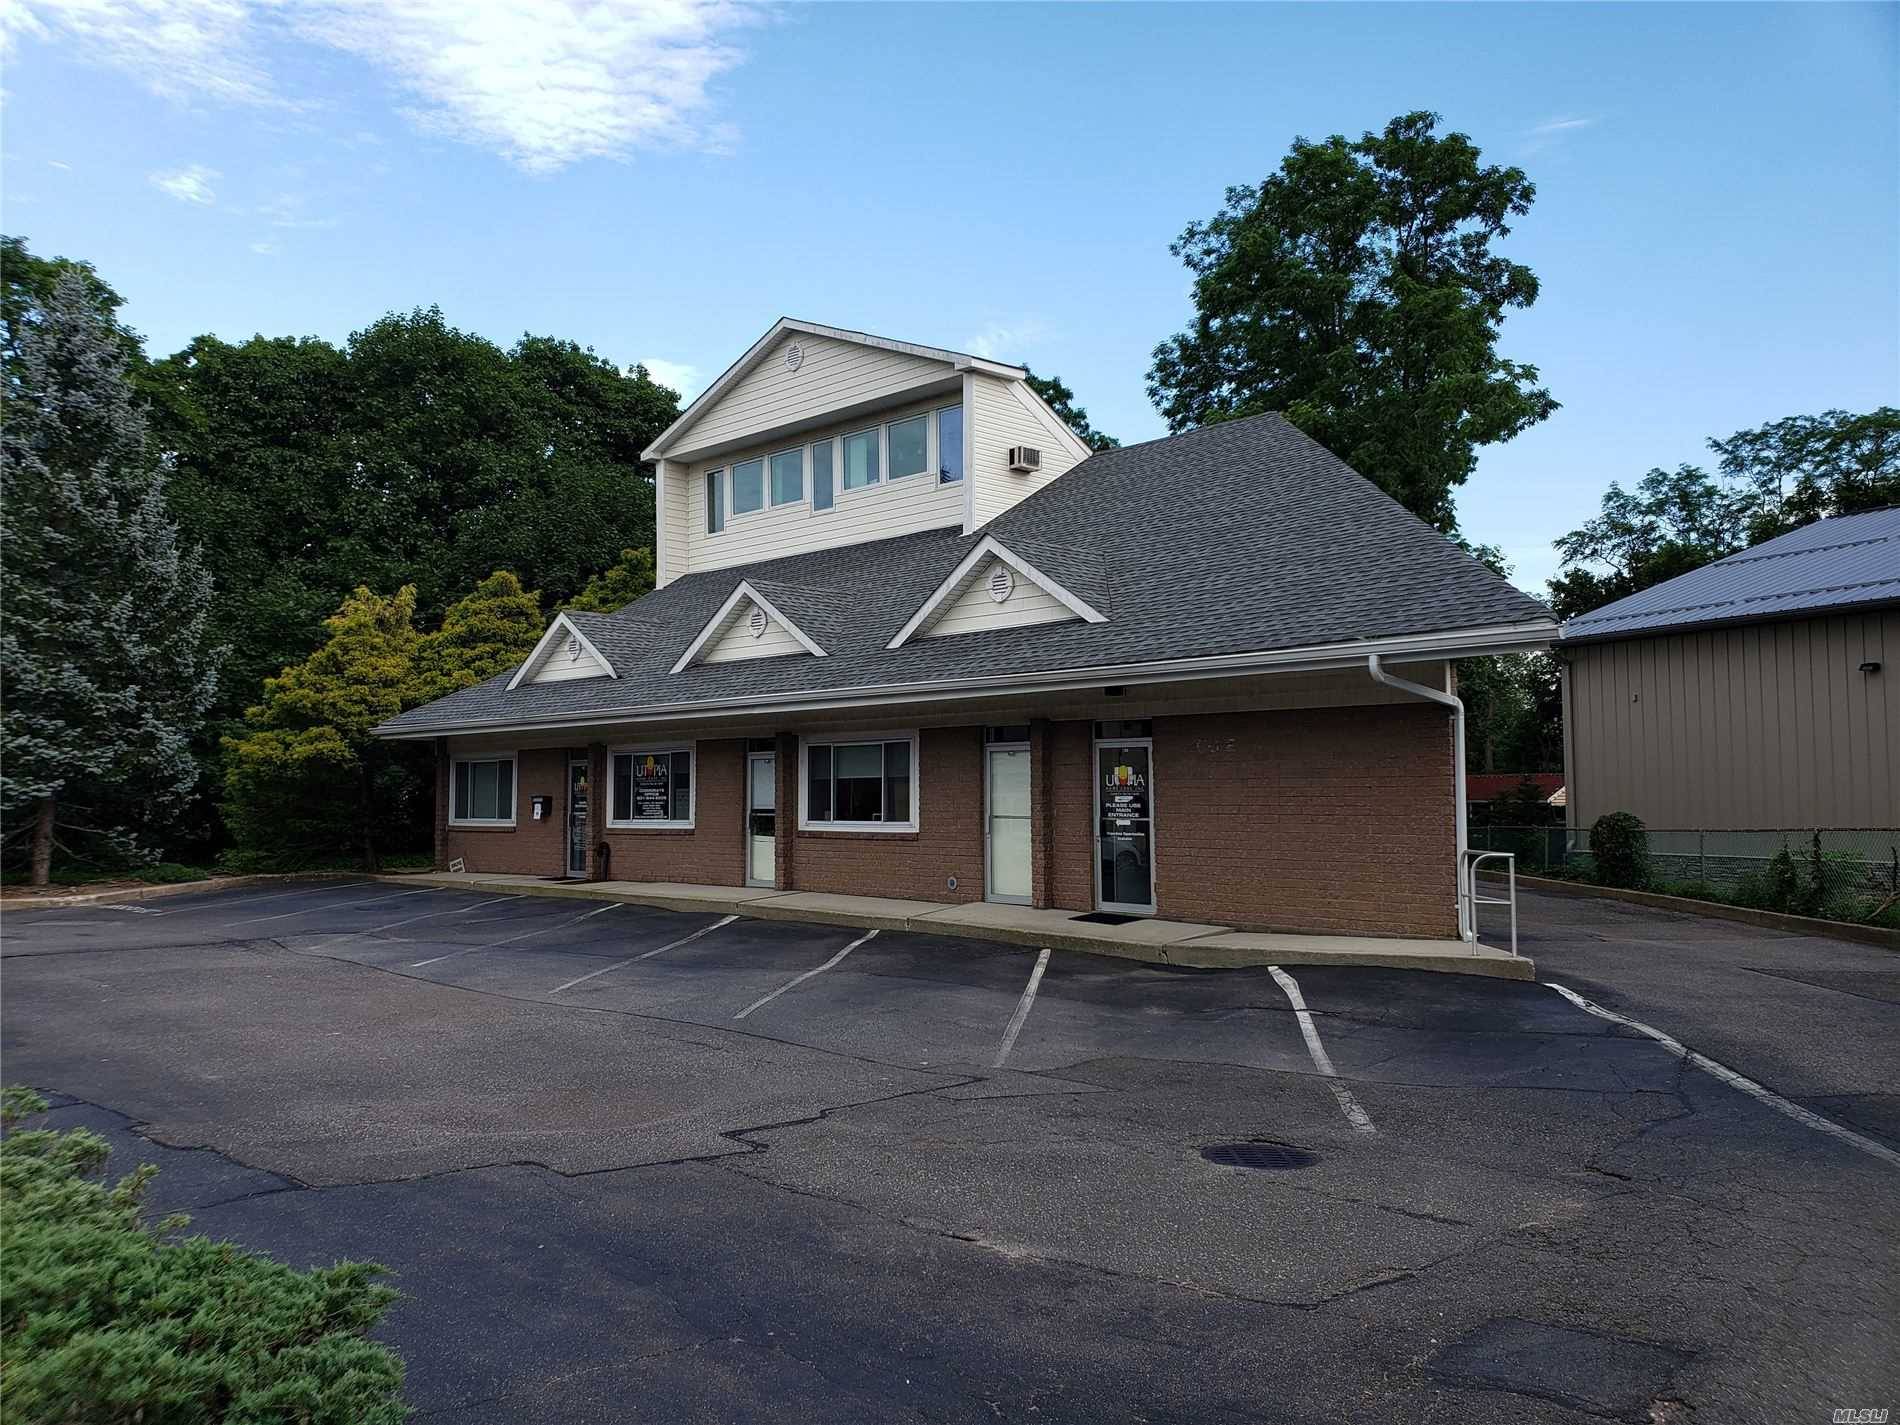 Great Office building in center of town, walking distance to LLRR, 18 parking spaces and public parking across the street.